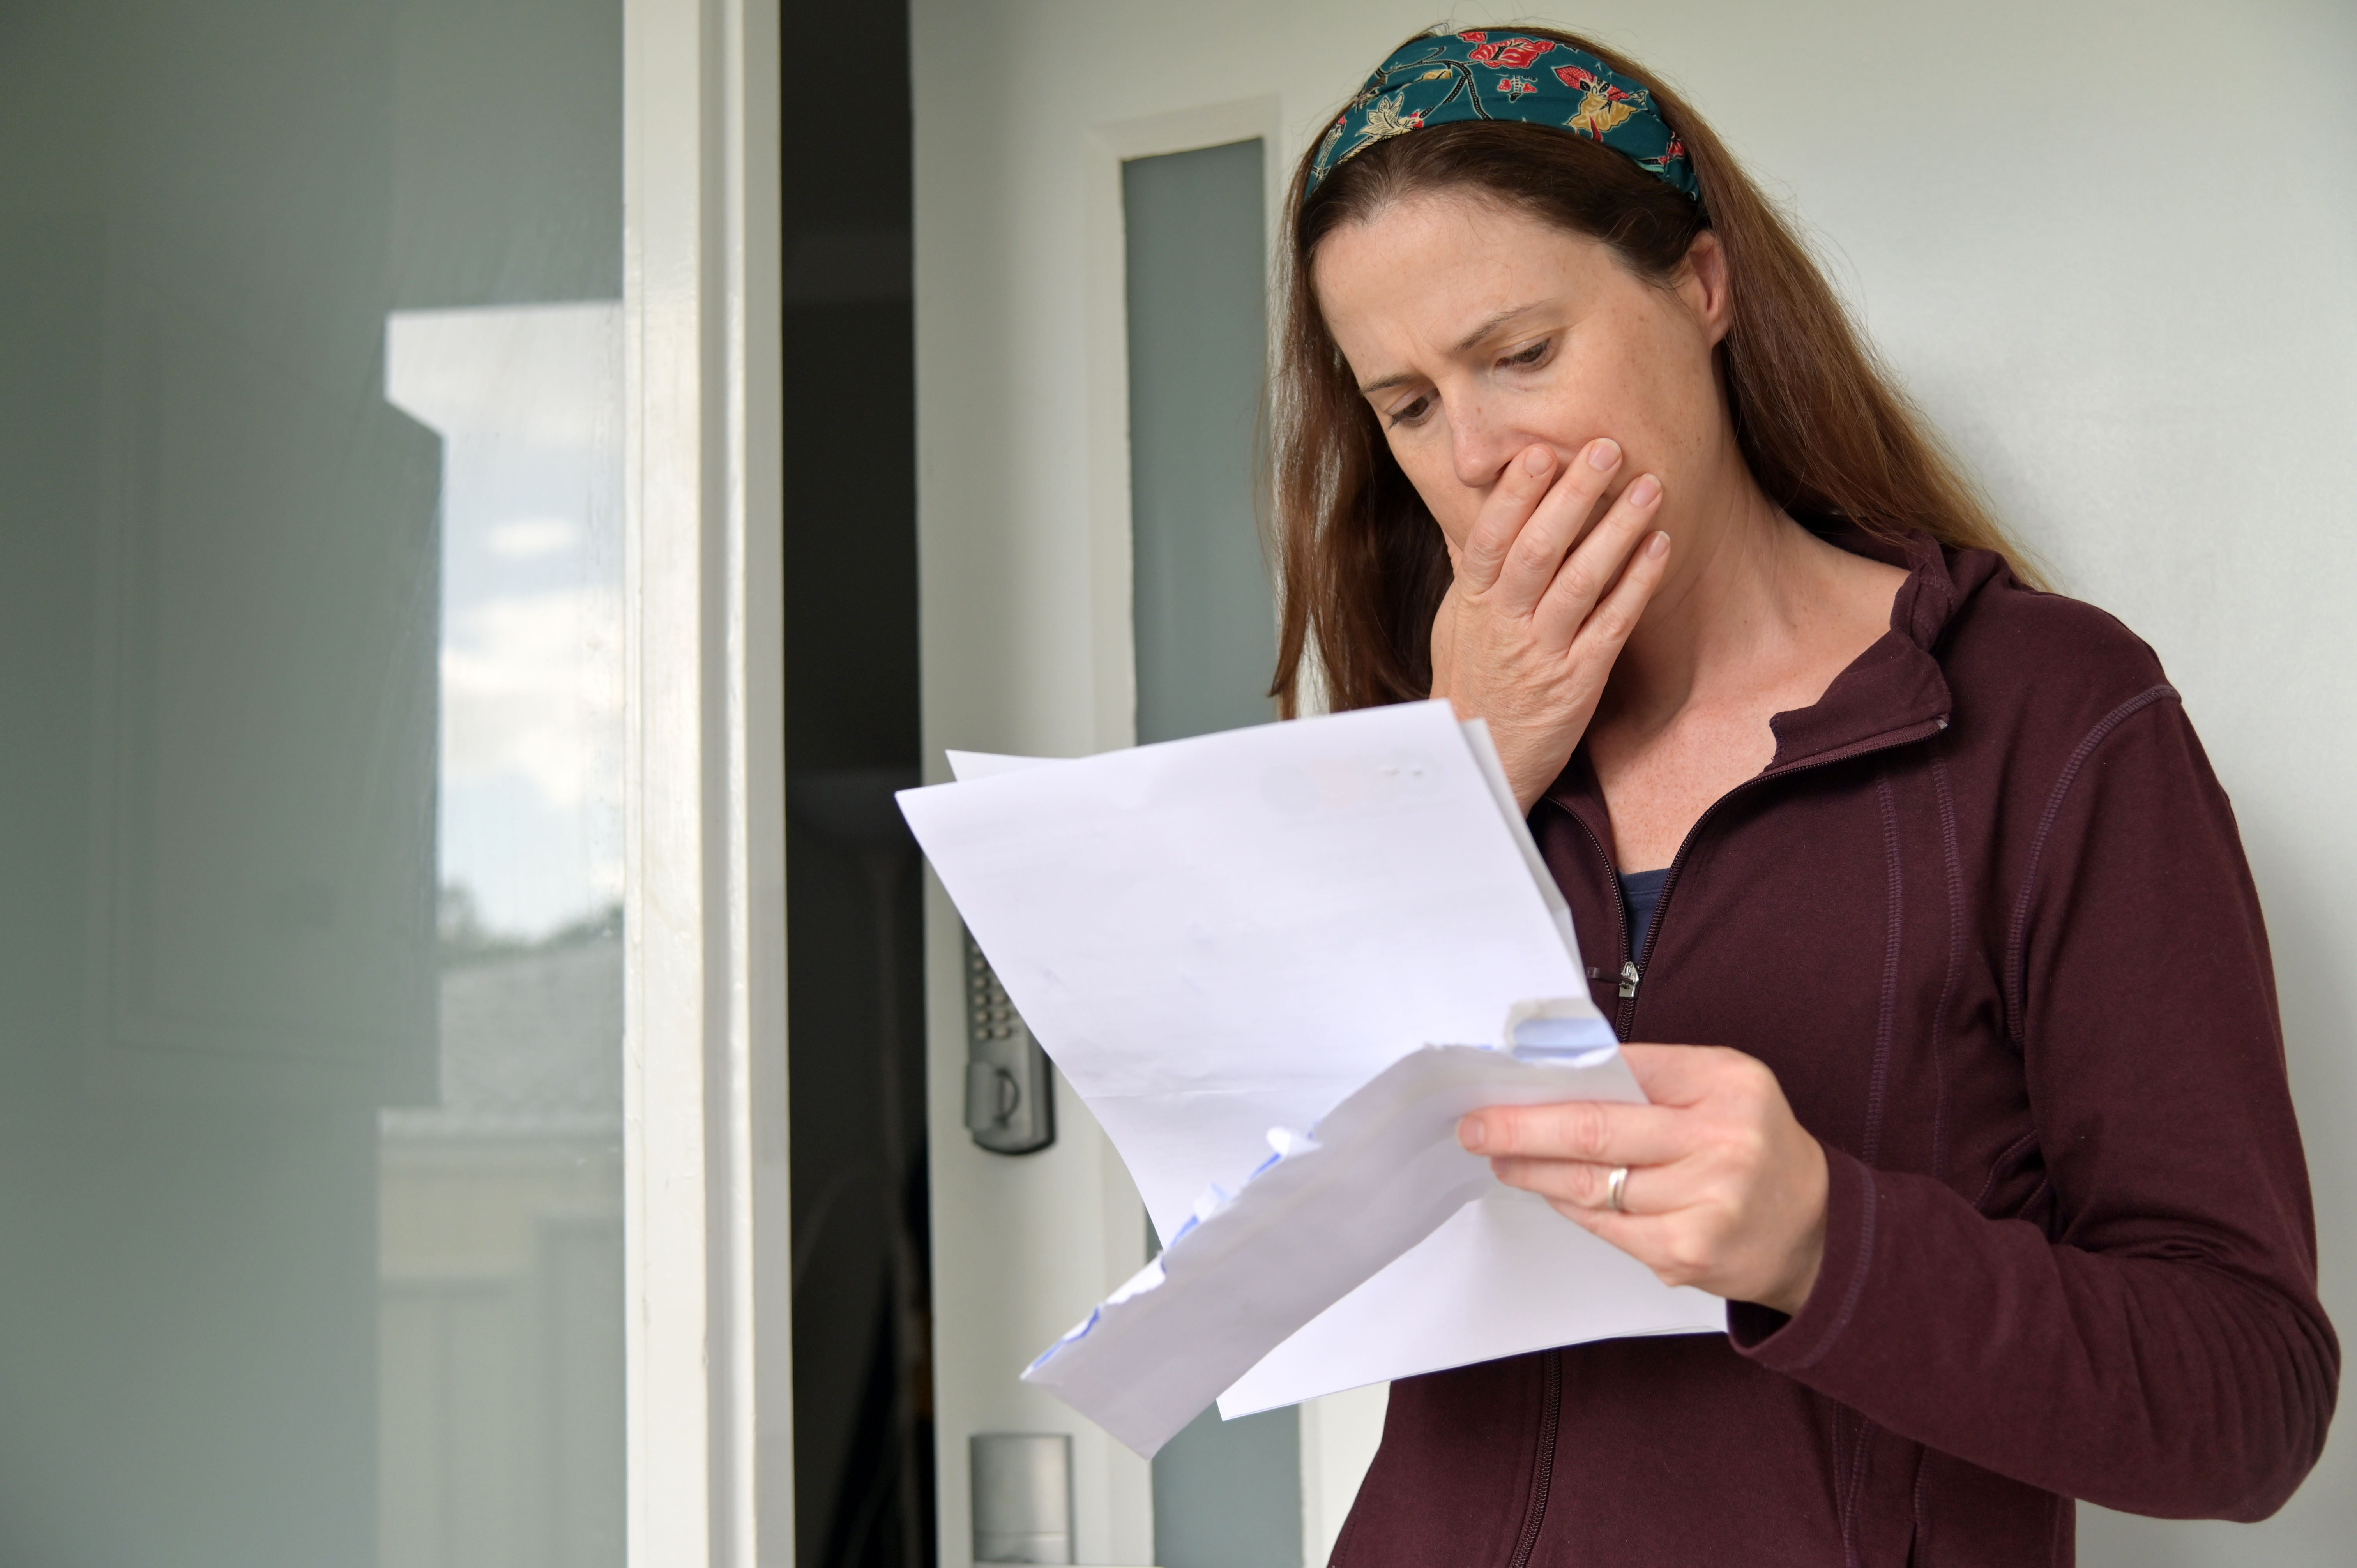 Shocked woman is reading the letter | Source: Shutterstock.com